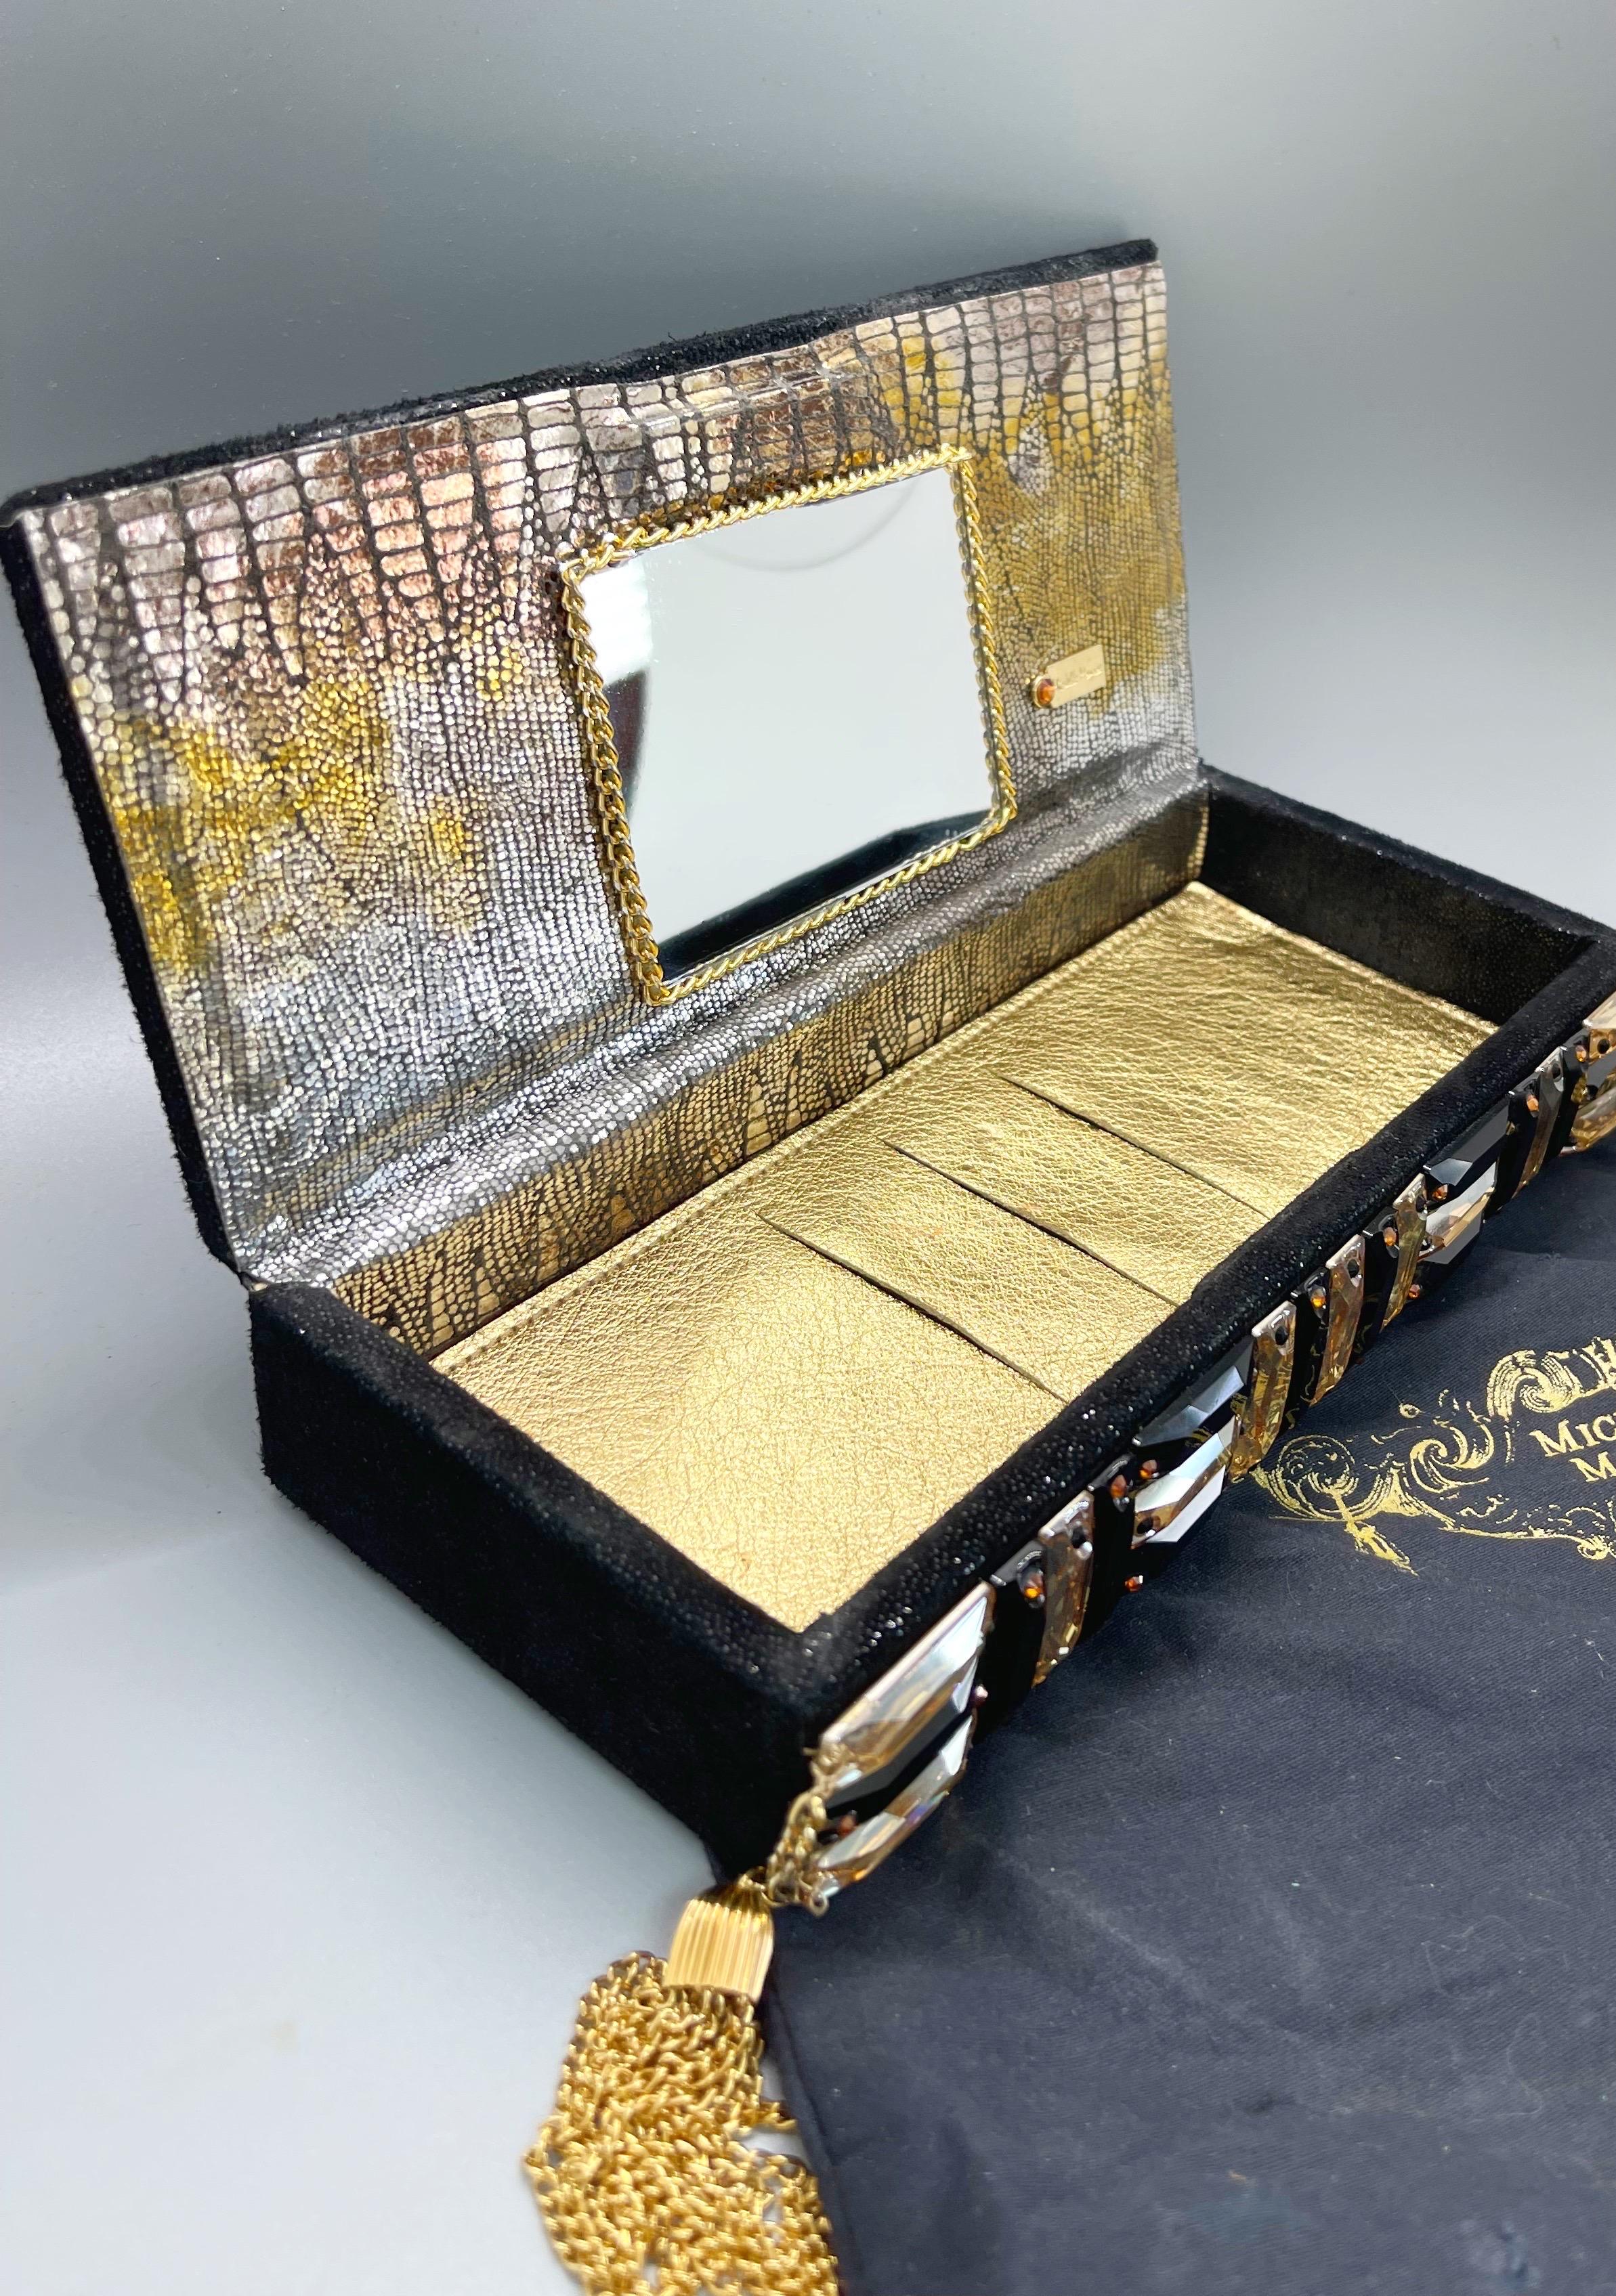 The perfect box clutch to complete any outfit. Magnetic closure. Black stingray embossed, with large rectangle gold and black rhinestones on the top. Gold tassels at each side of the clutch. Built in credit card and ID slots so you don’t need a